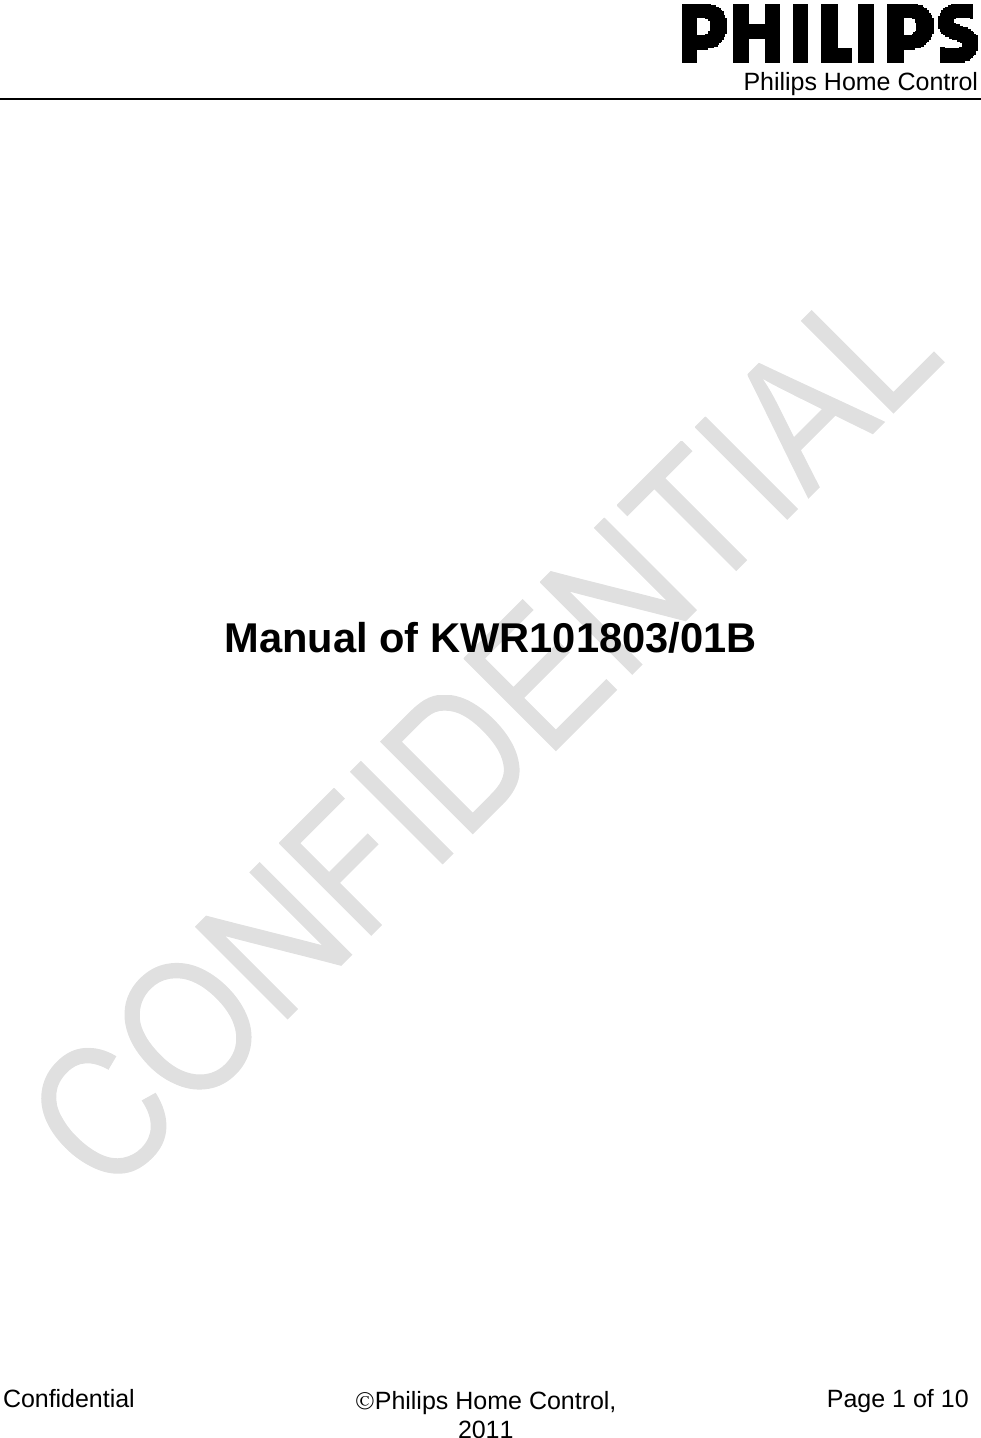   Philips Home Control Confidential  ©Philips Home Control, 2011  Page 1 of 10       Manual of KWR101803/01B                                                                                                